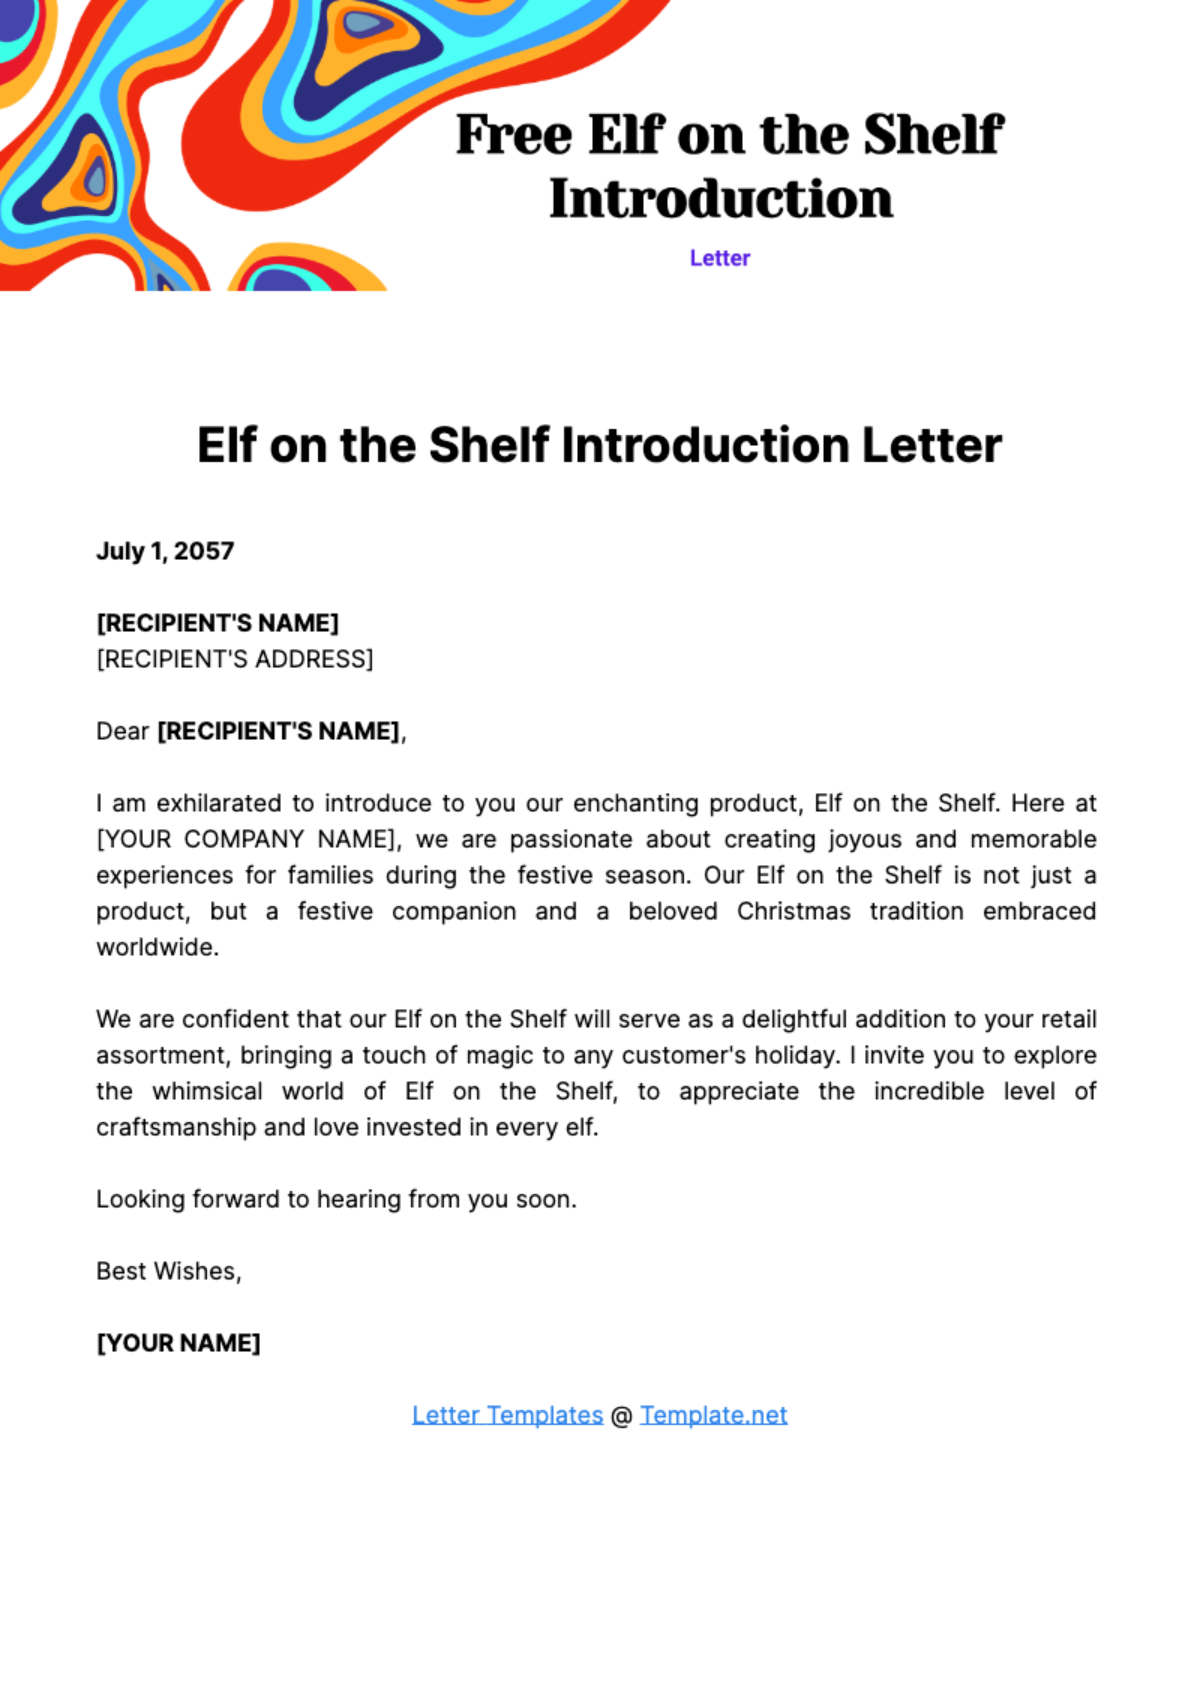 Free Elf on the Shelf Introduction Letter Template